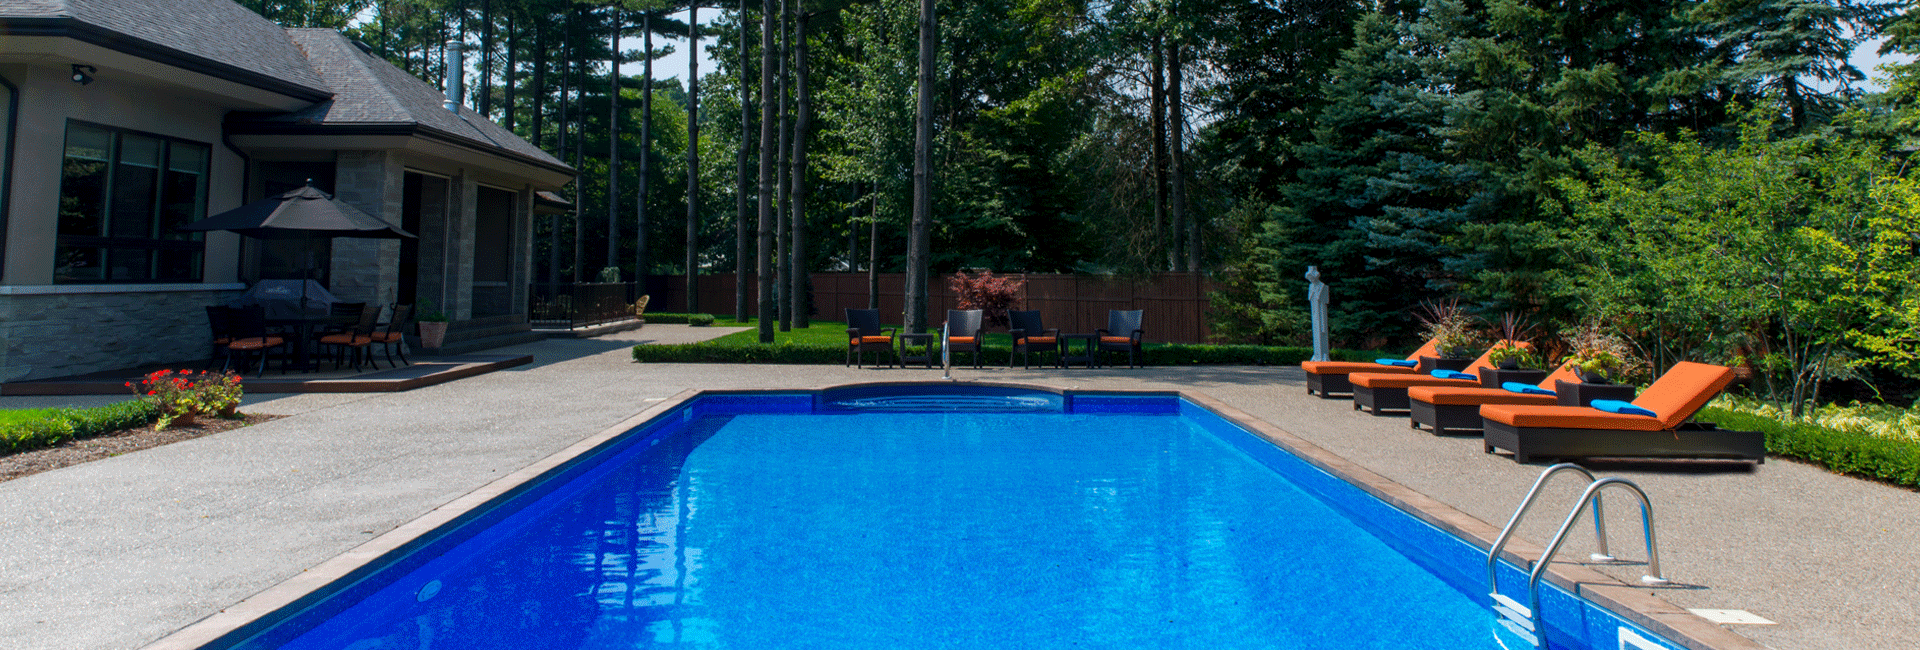 small rectangular pool with rock fence in background